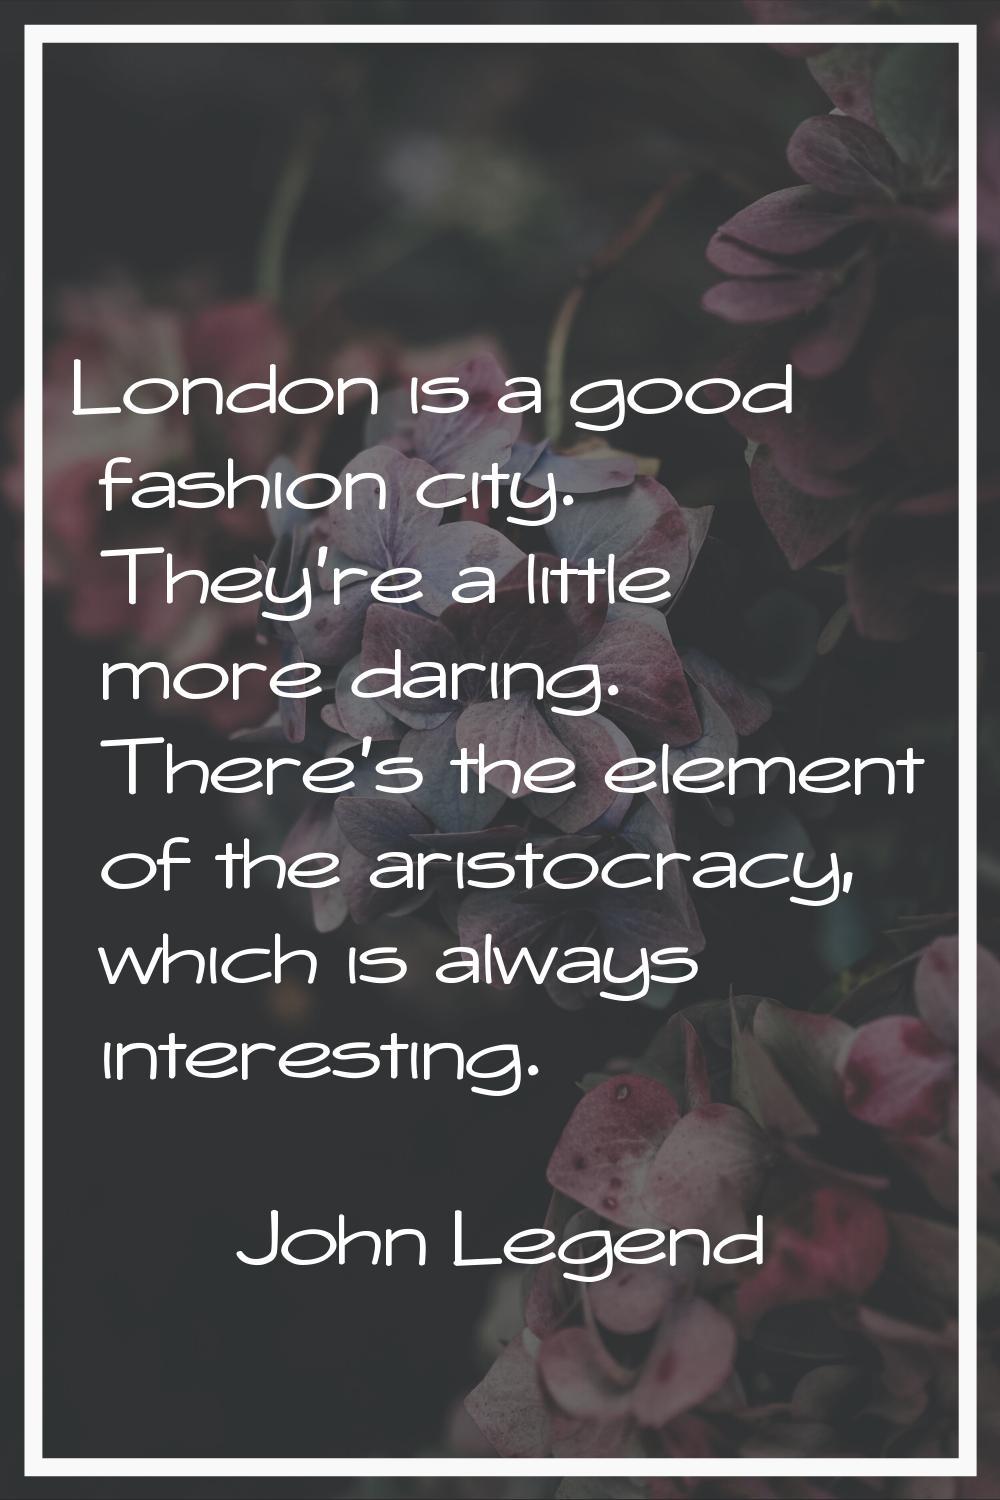 London is a good fashion city. They're a little more daring. There's the element of the aristocracy